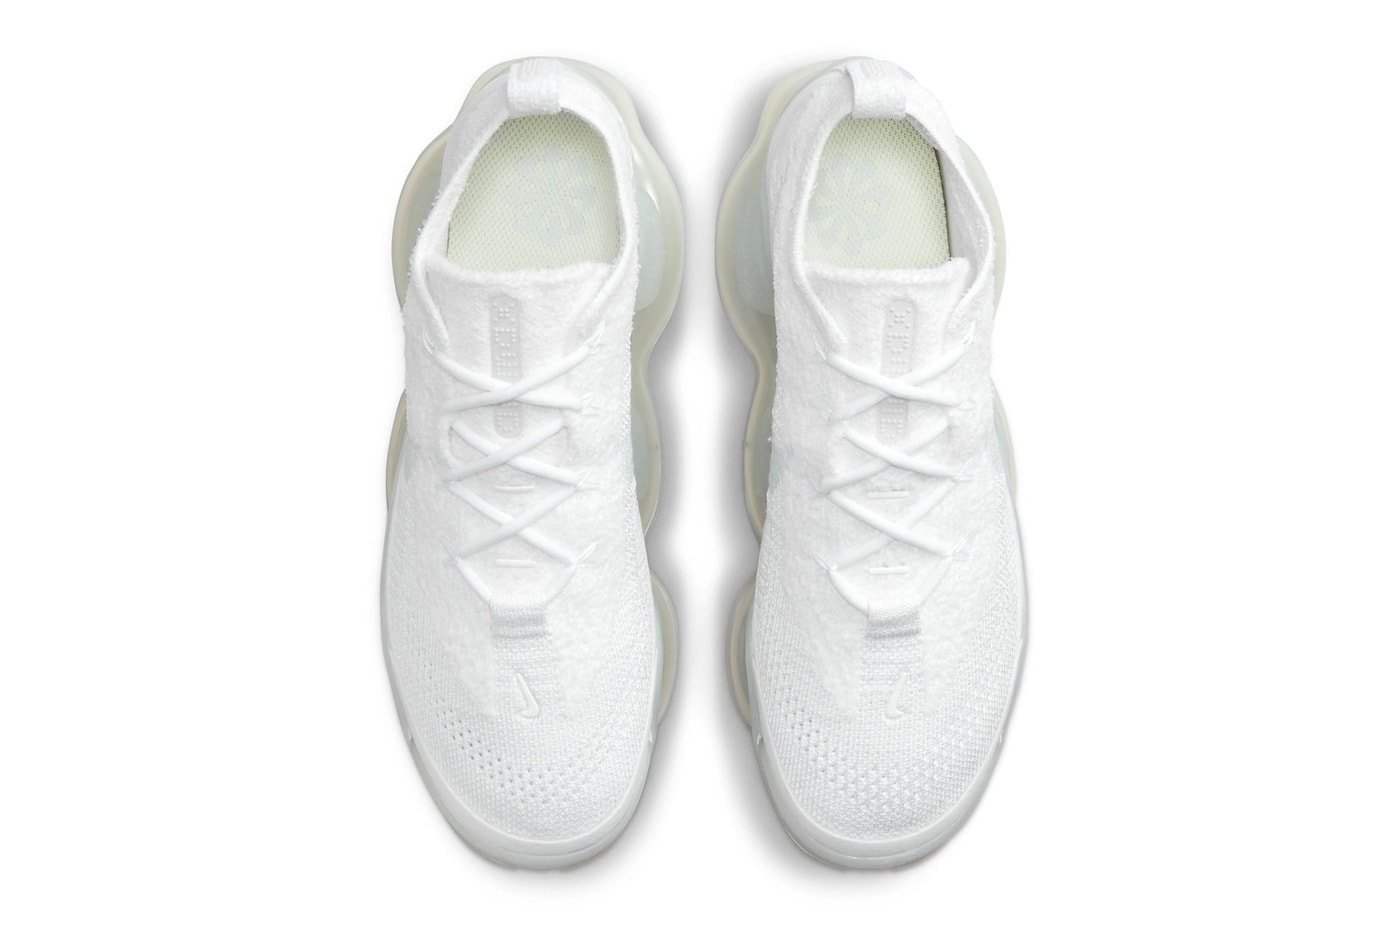 Nike Air Max Scorpion white mint spring 2023 DJ4702 100 flyknit release info date price